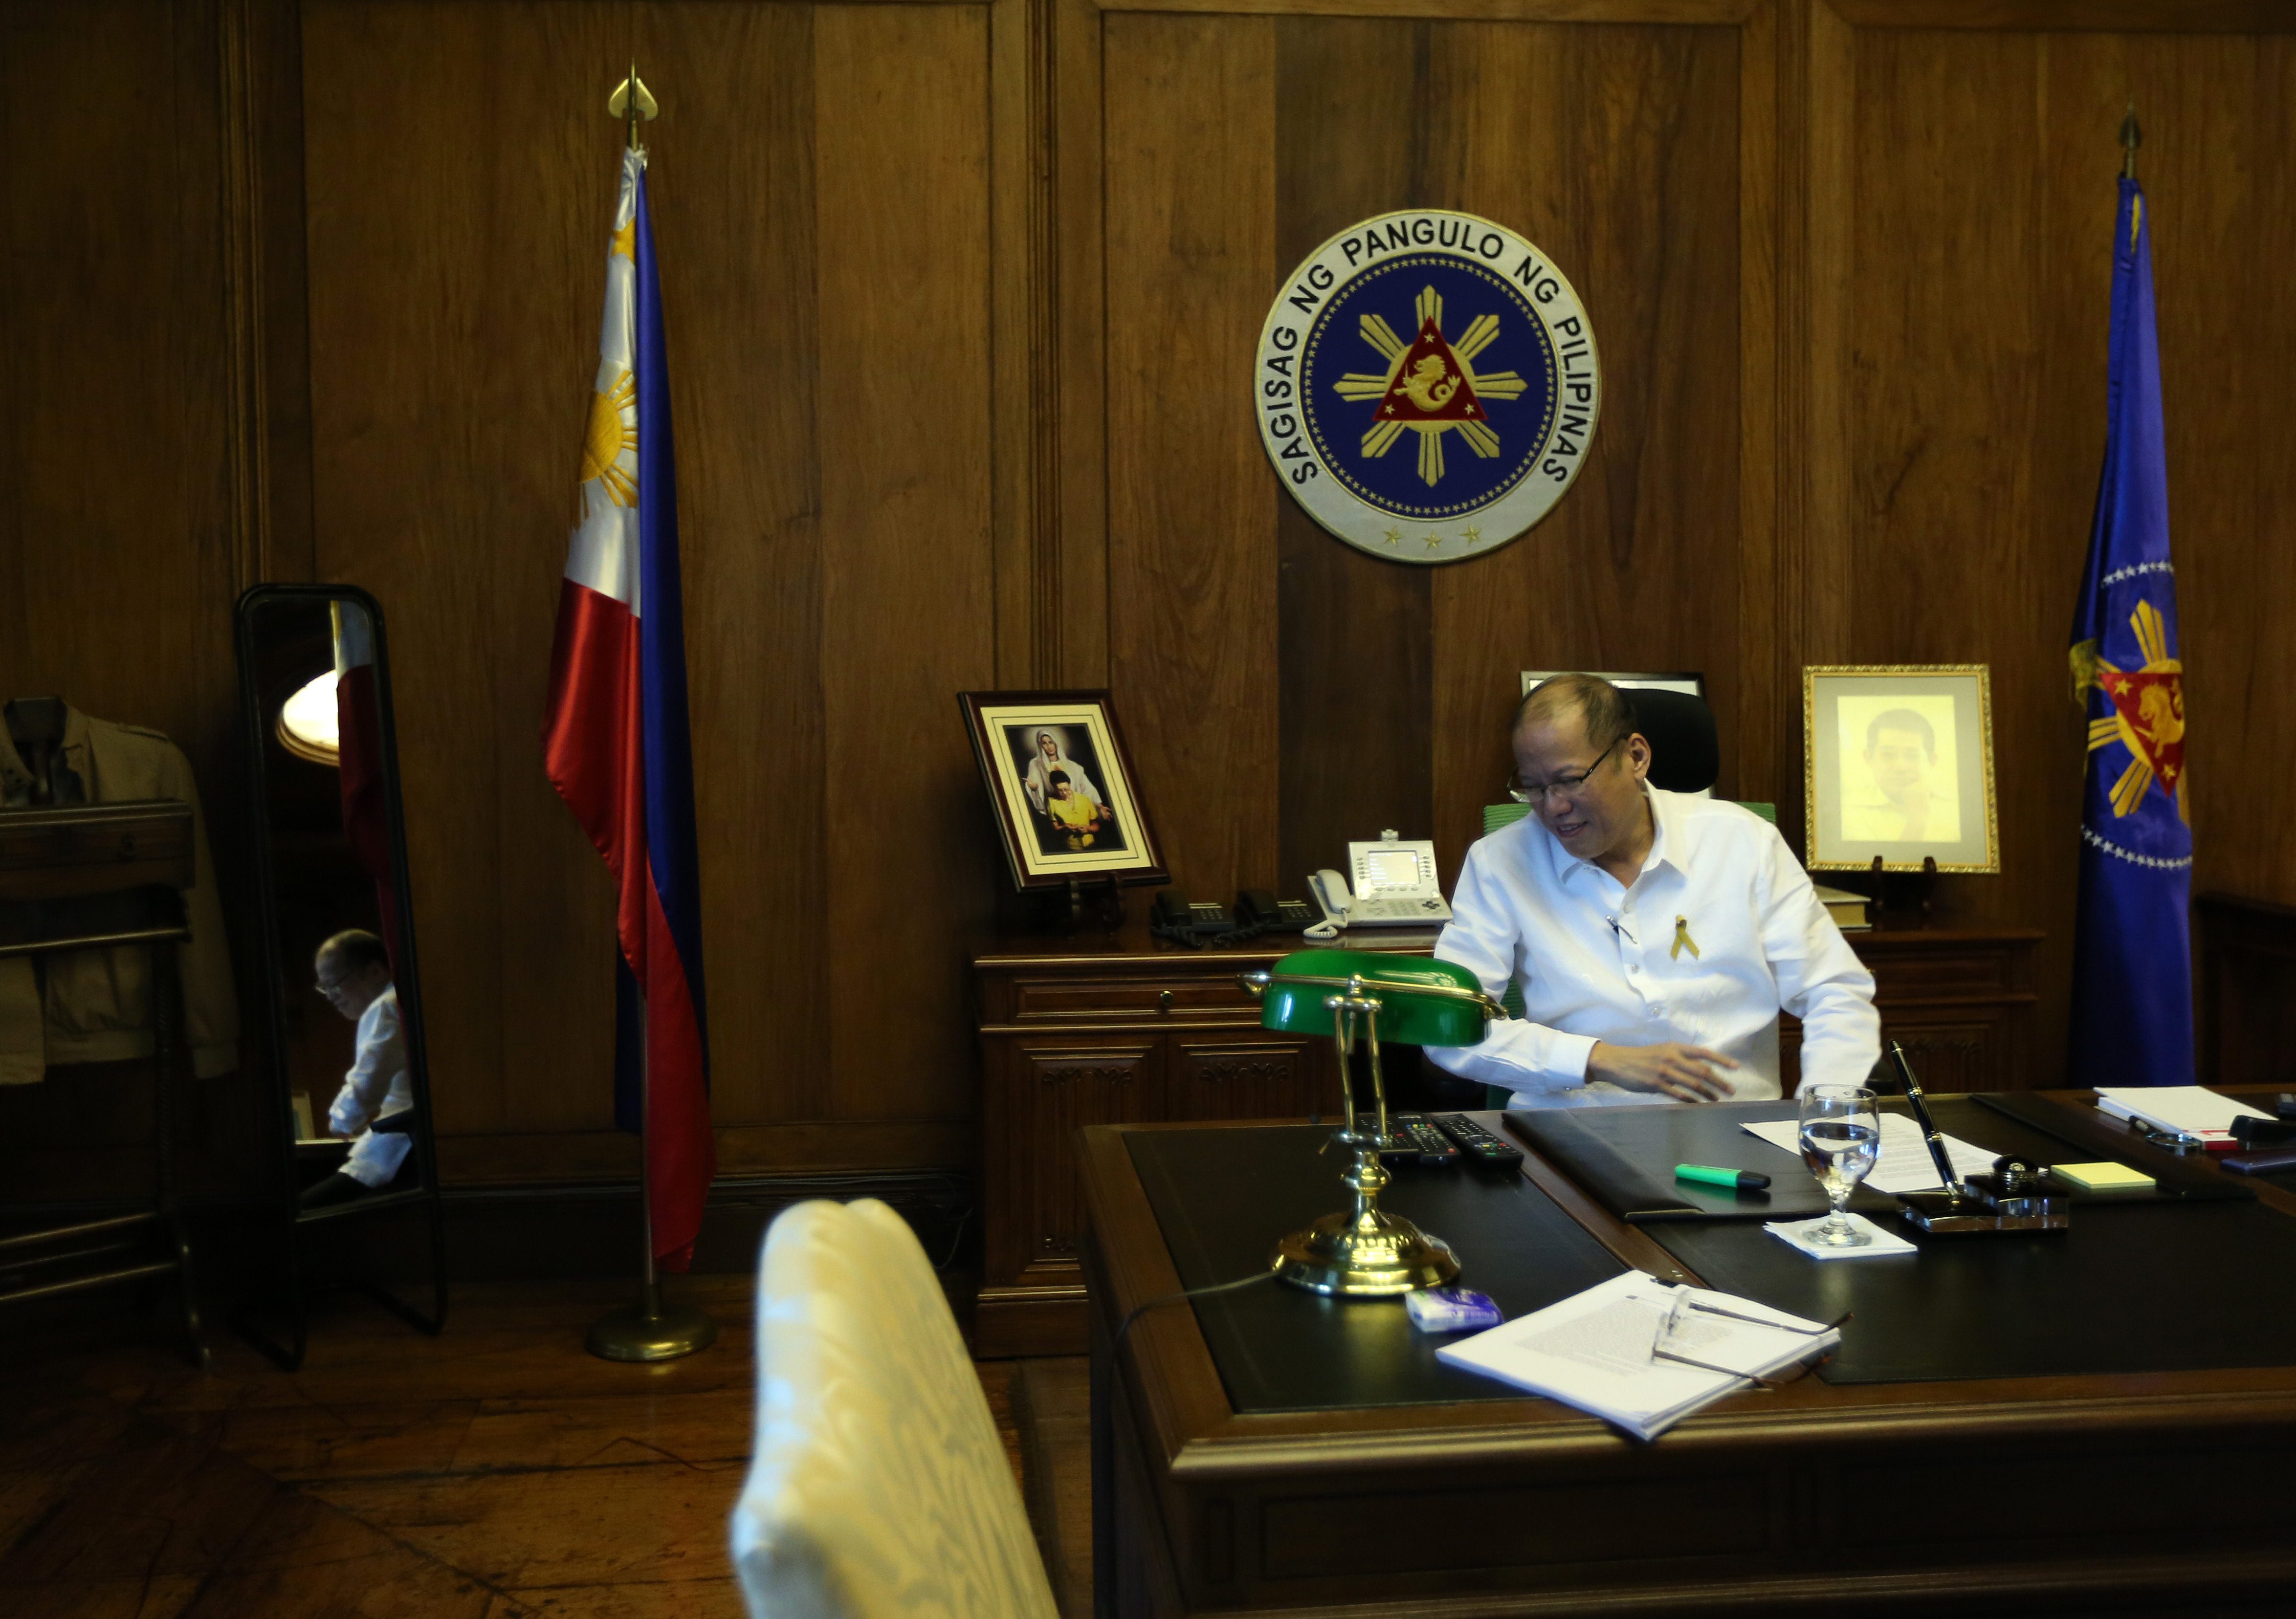 STILL WORKING. President Benigno Aquino III spends his last day in office still working. Beside him are photos of his parents. Photo by Gil Nartea/Malacañang Photo Bureau 